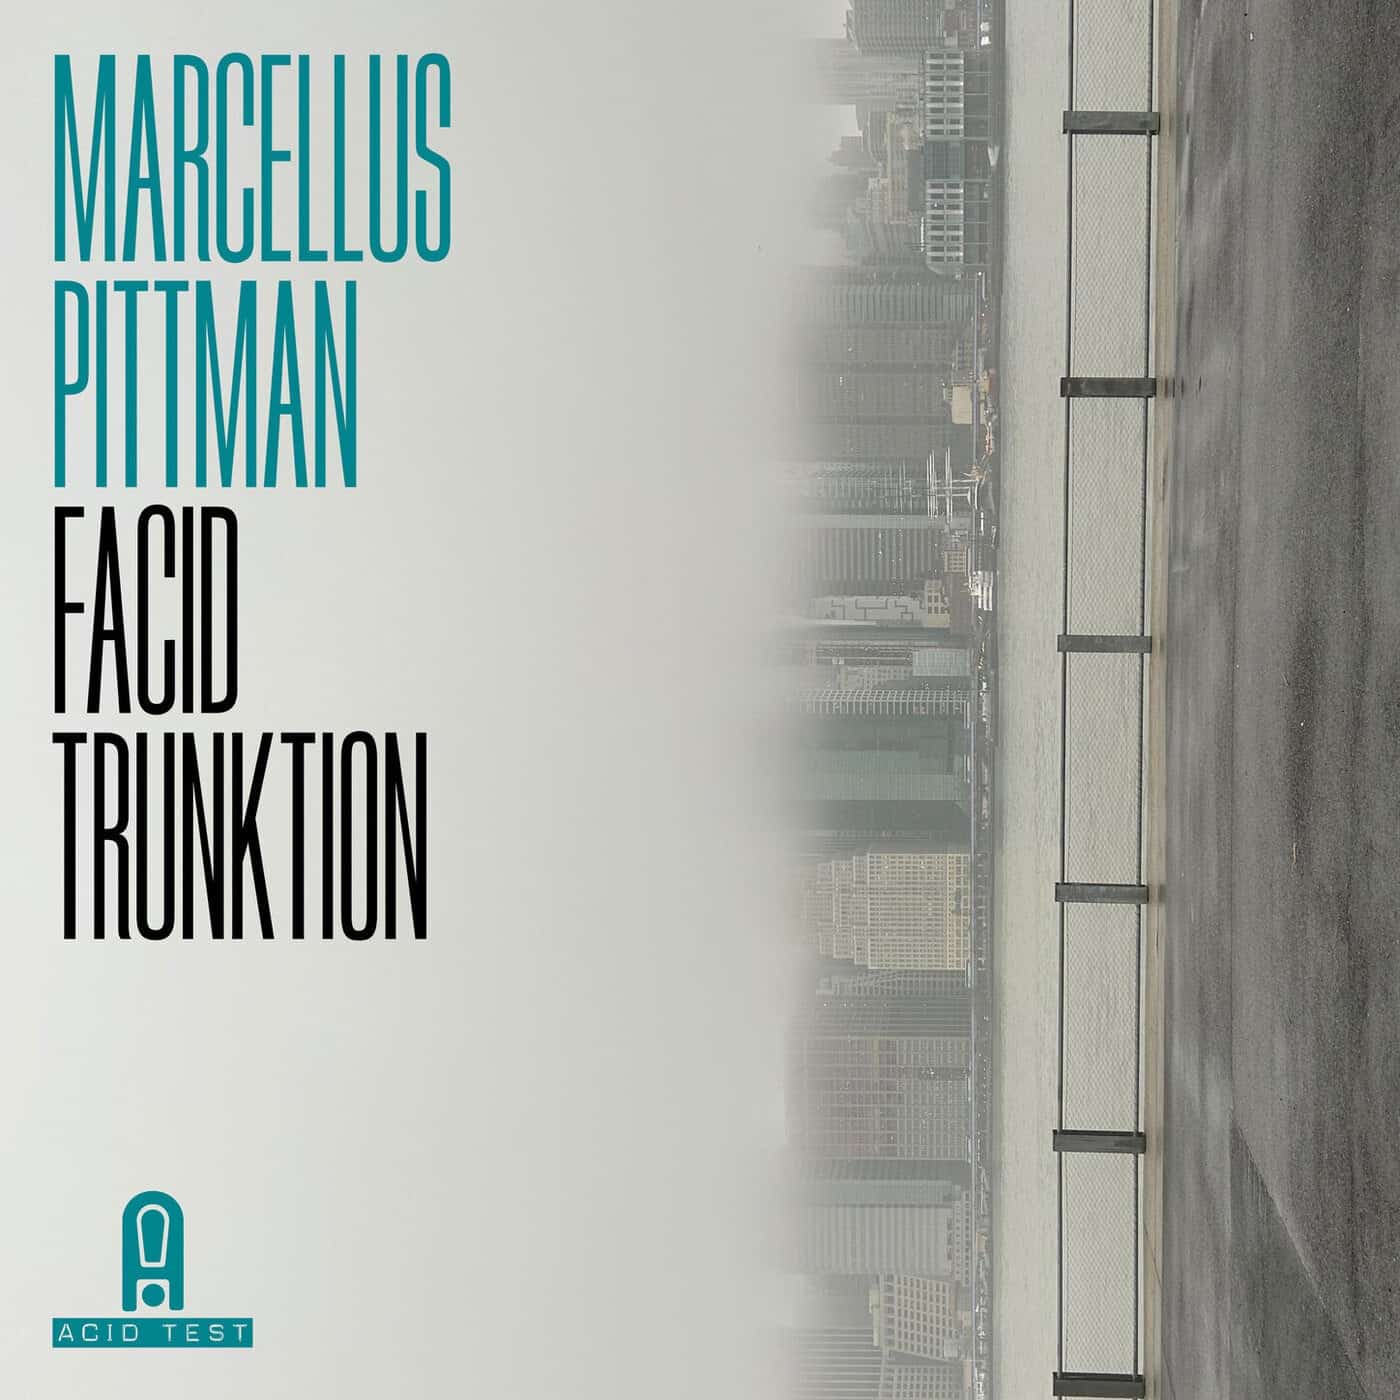 Download Marcellus Pittman - Facid Trunktion on Electrobuzz